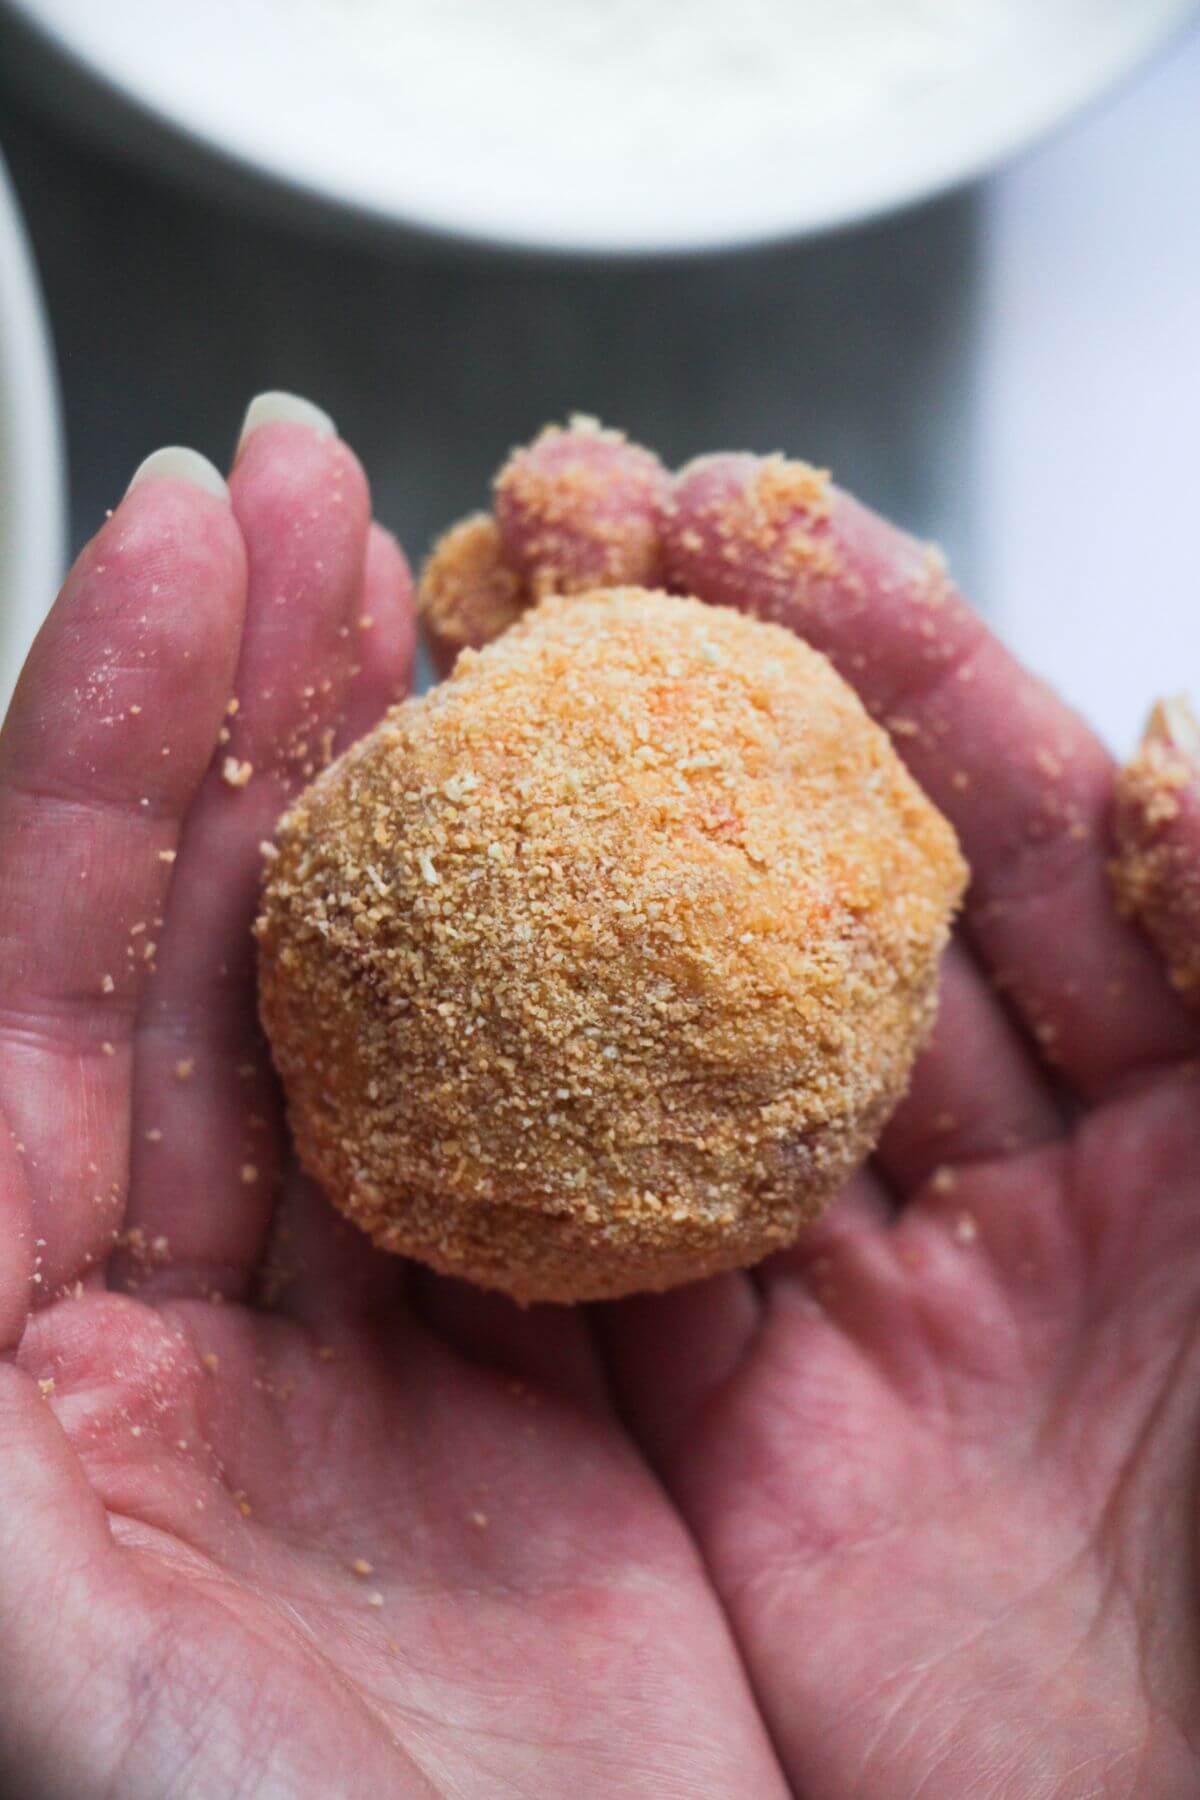 Close up of coated arancini ball in hands.